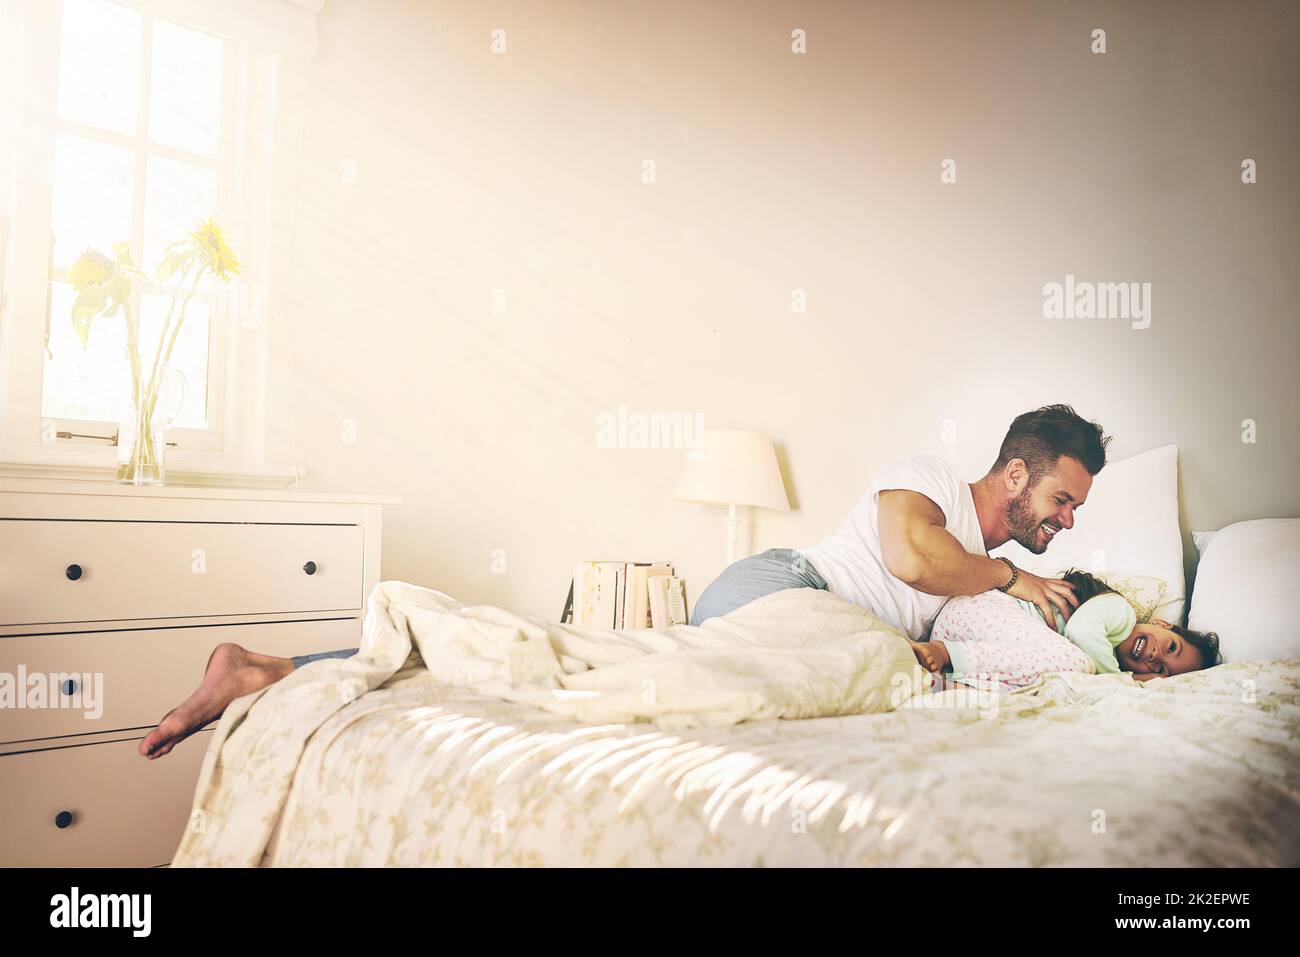 Getting tickle attacked. Shot of a cheerful father and daughter having a tickle fight on the bed at home. Stock Photo